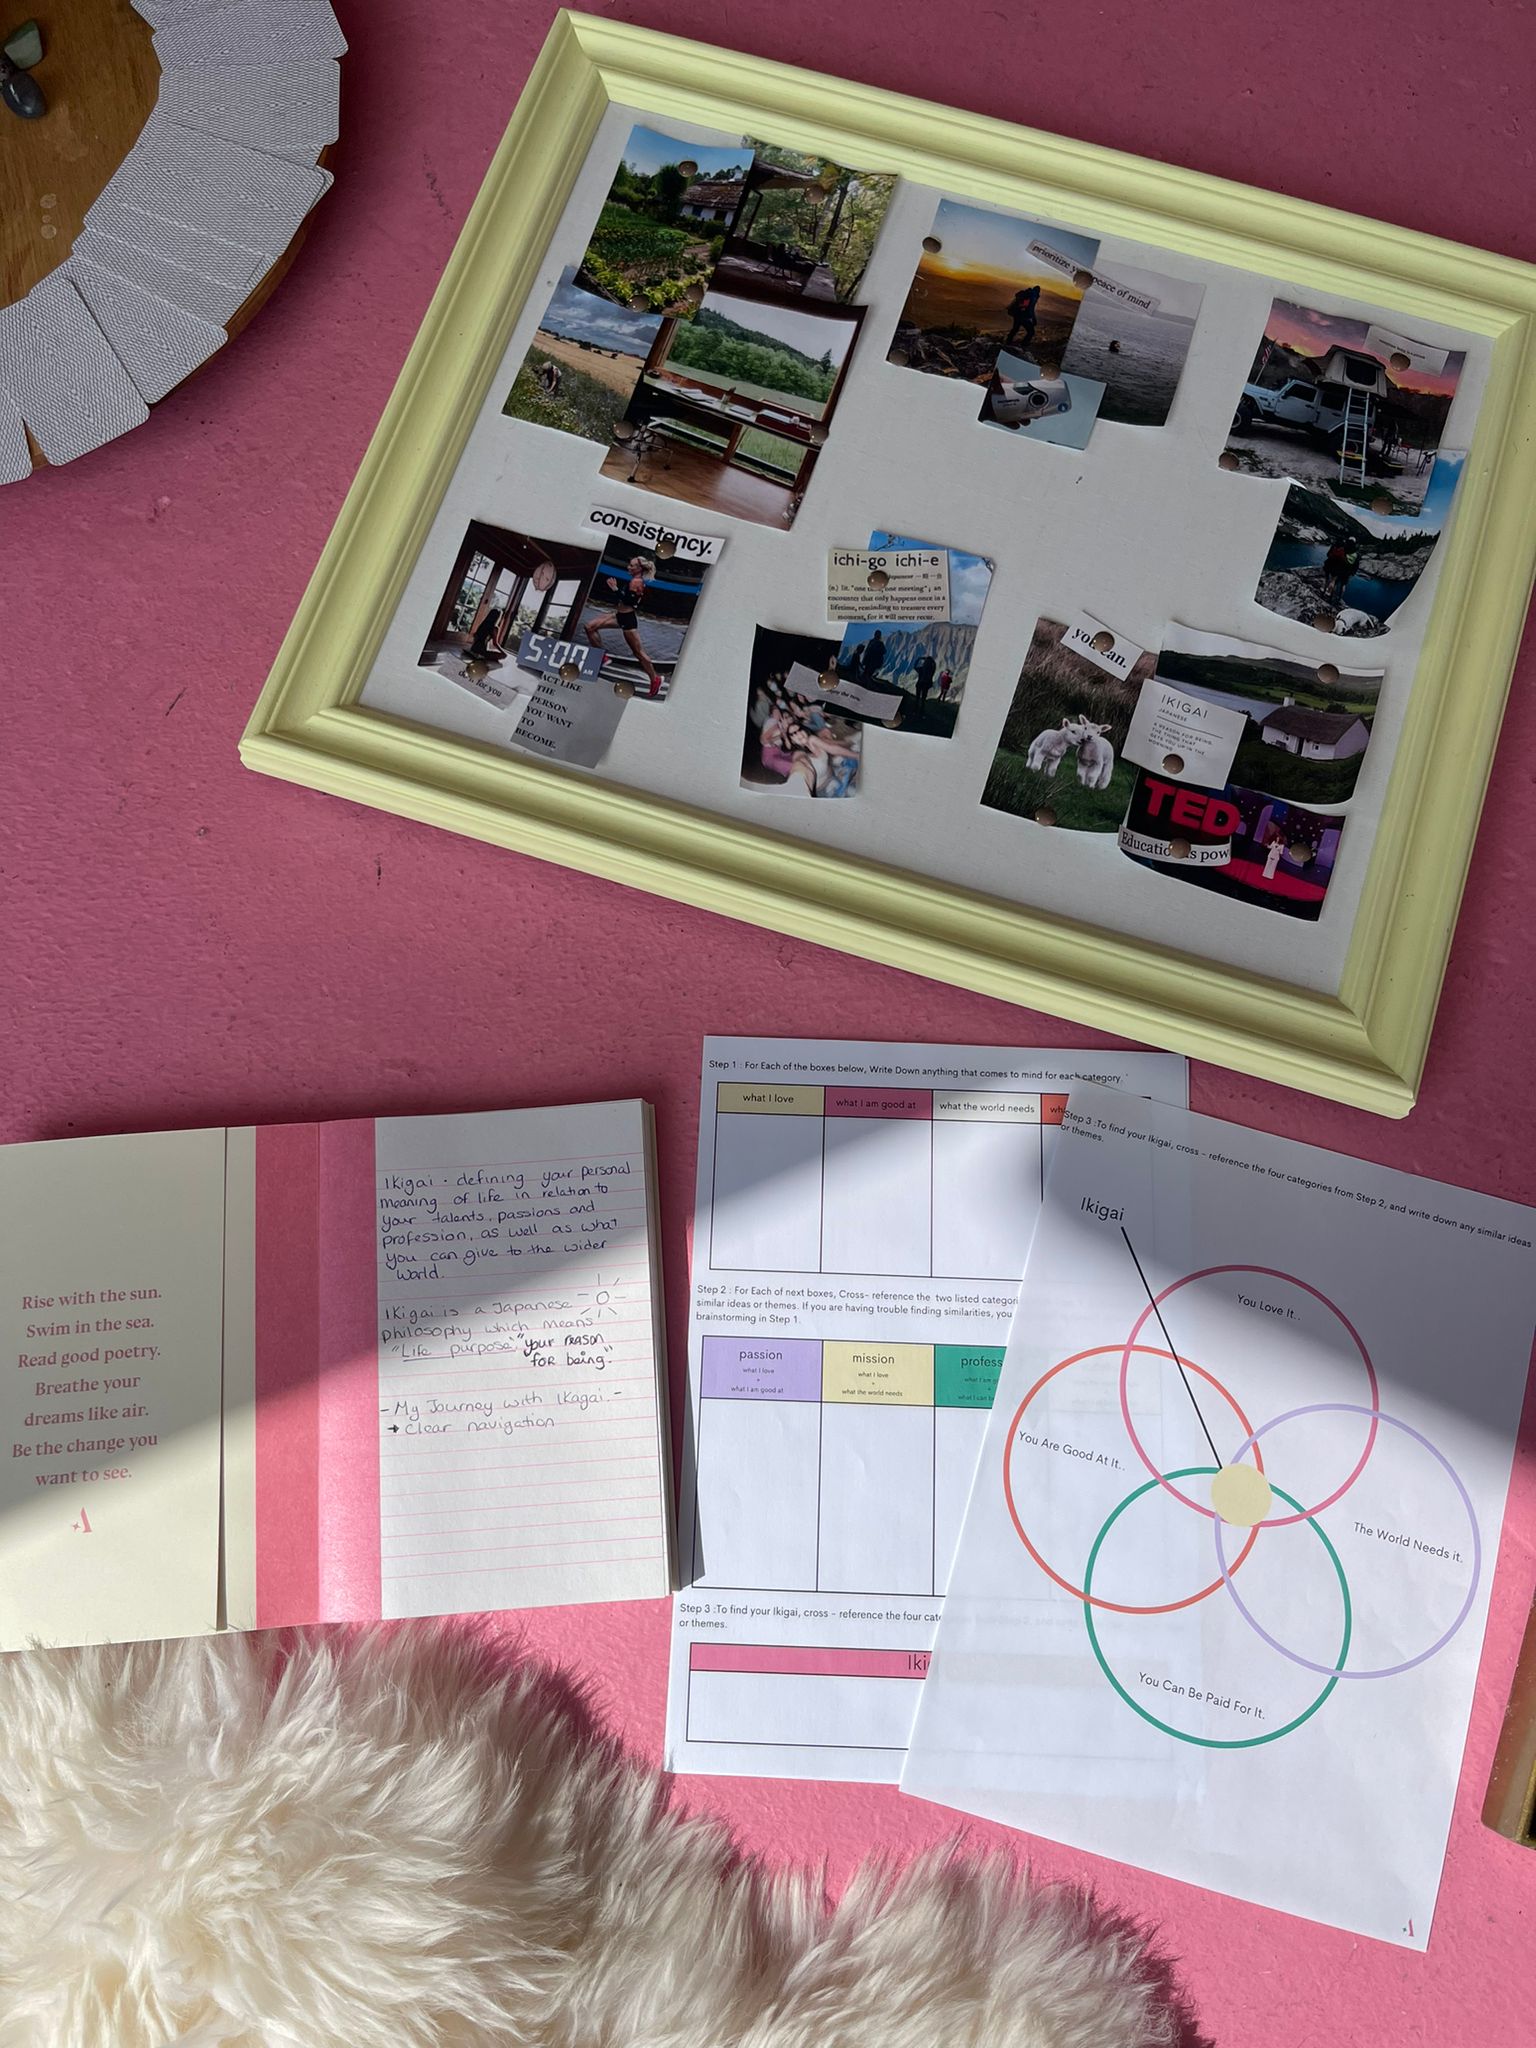 Reconnect | Cacao, Ikagai & Vision Board Workshop - April 21st